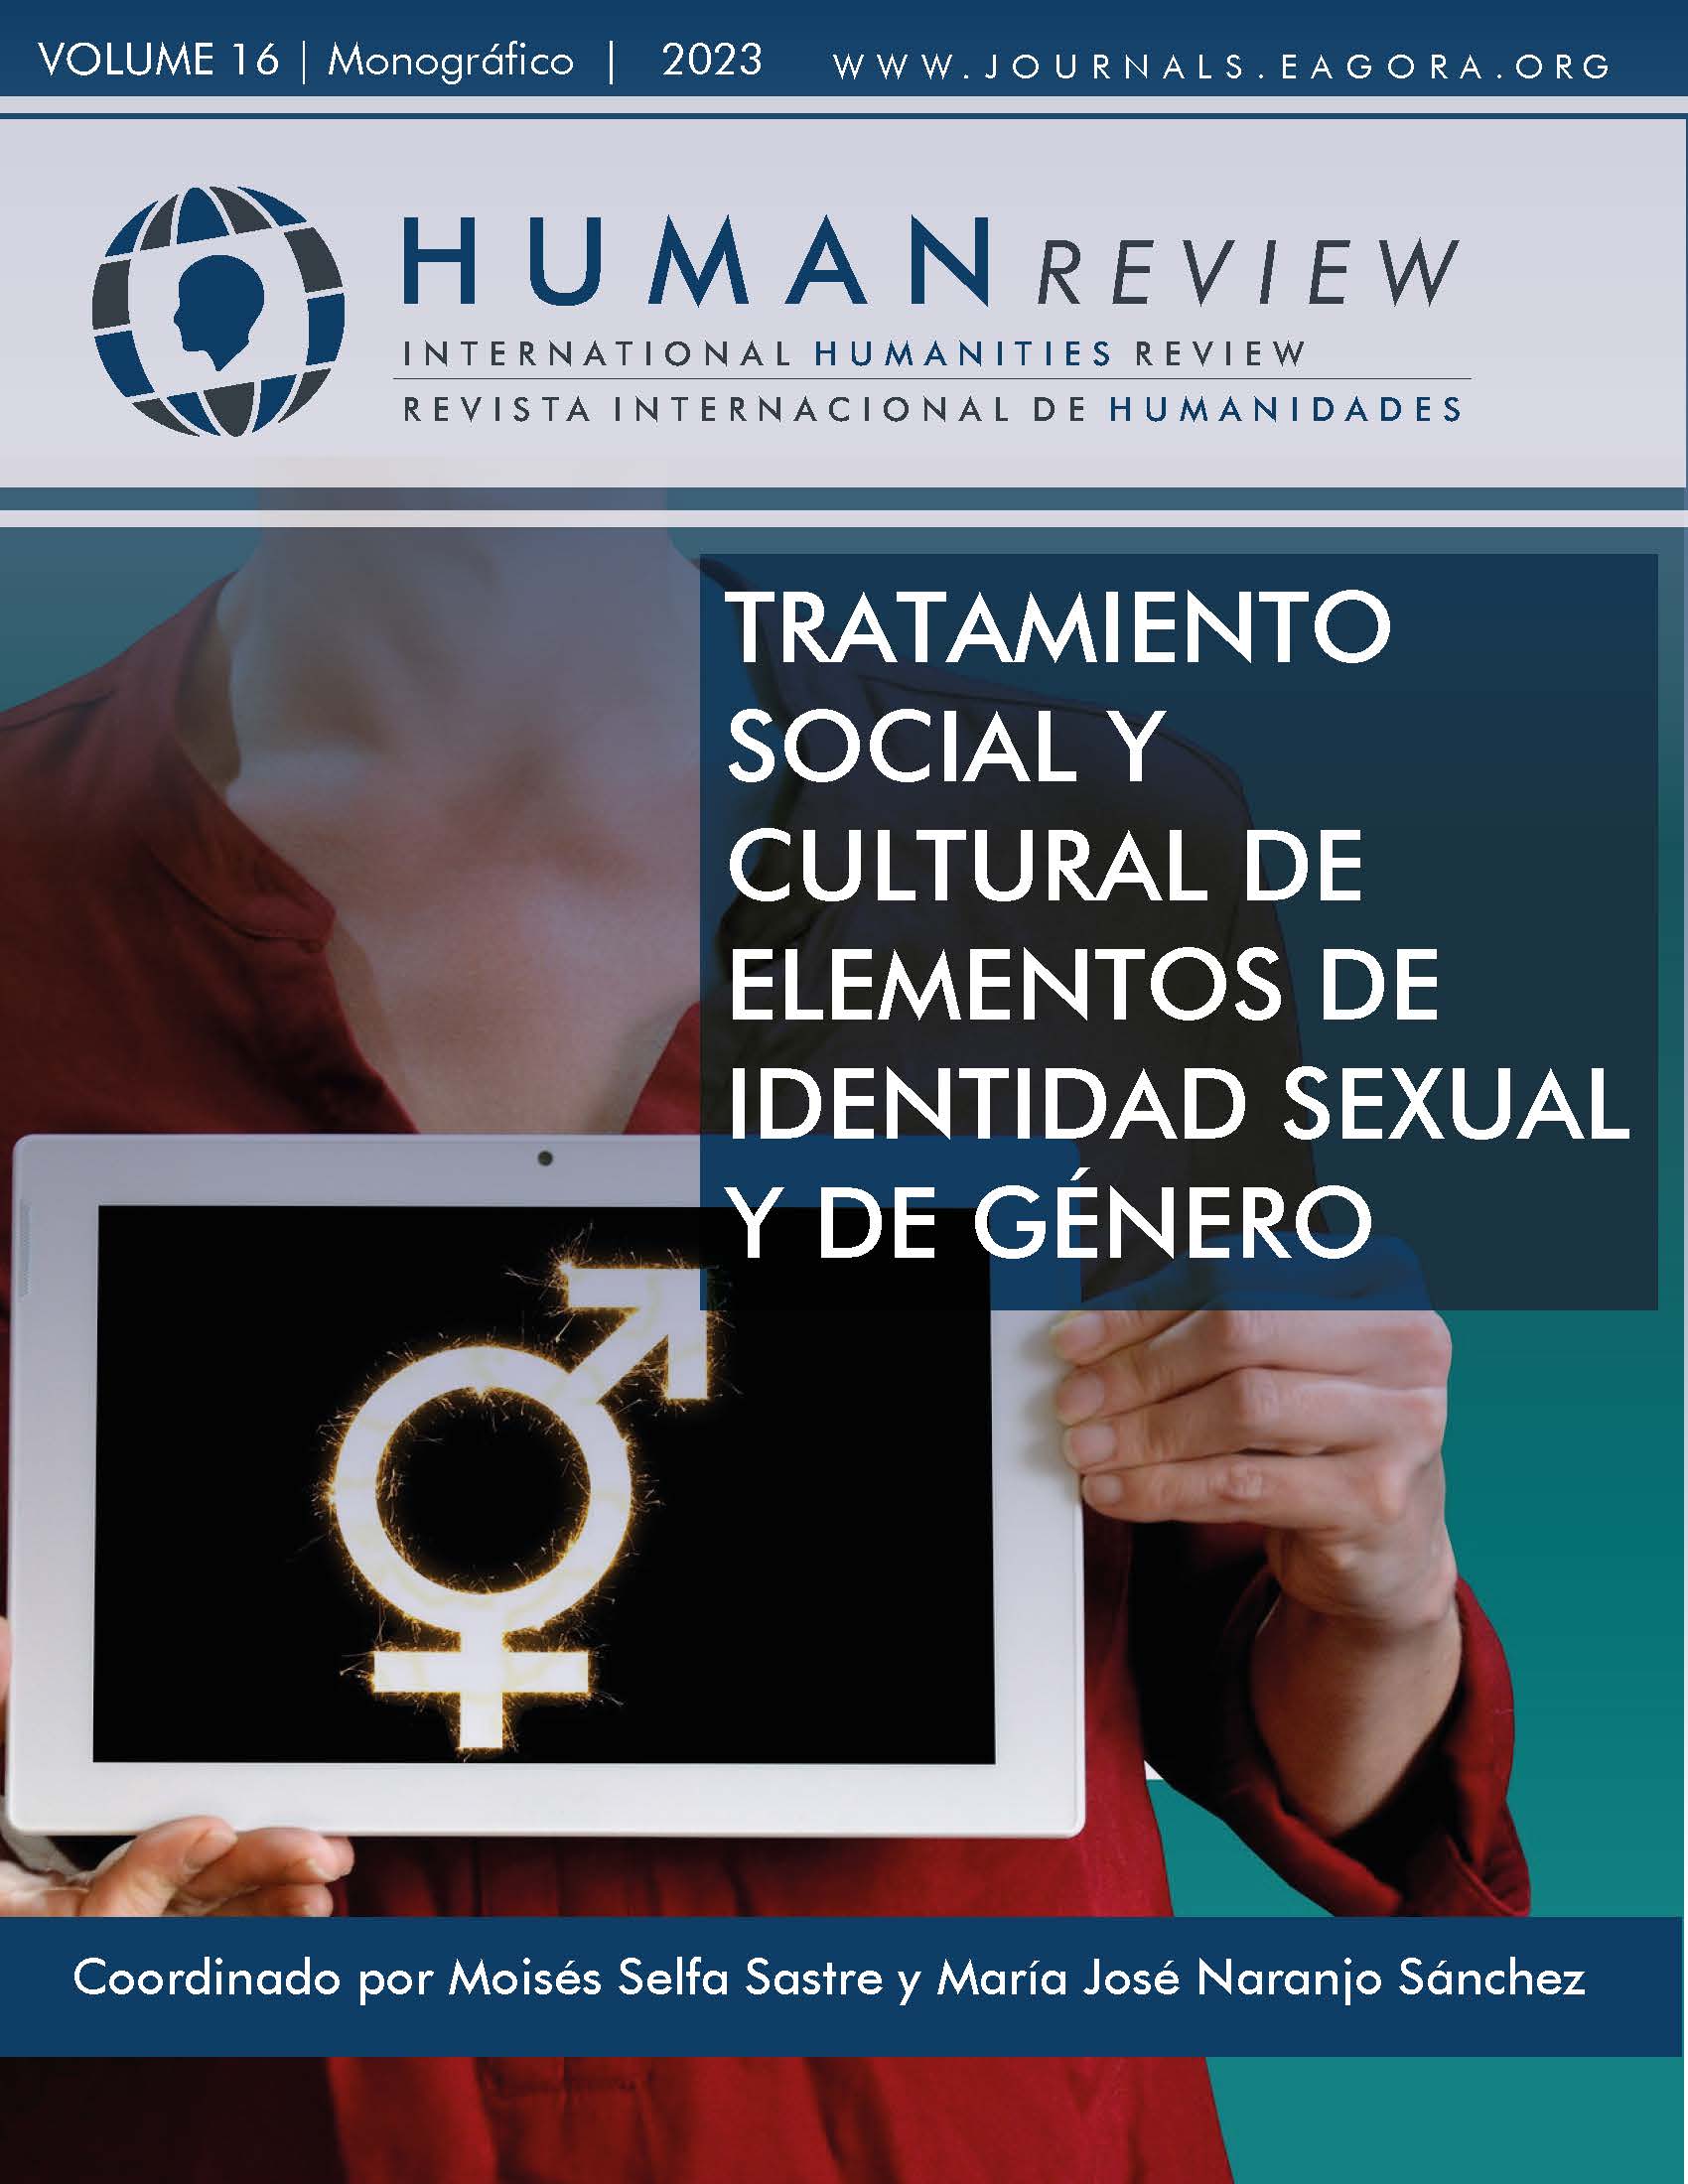 					View Vol. 16 No. 6 (2023): Monograph: "Social and cultural treatment of elements of sexual and gender identity"
				